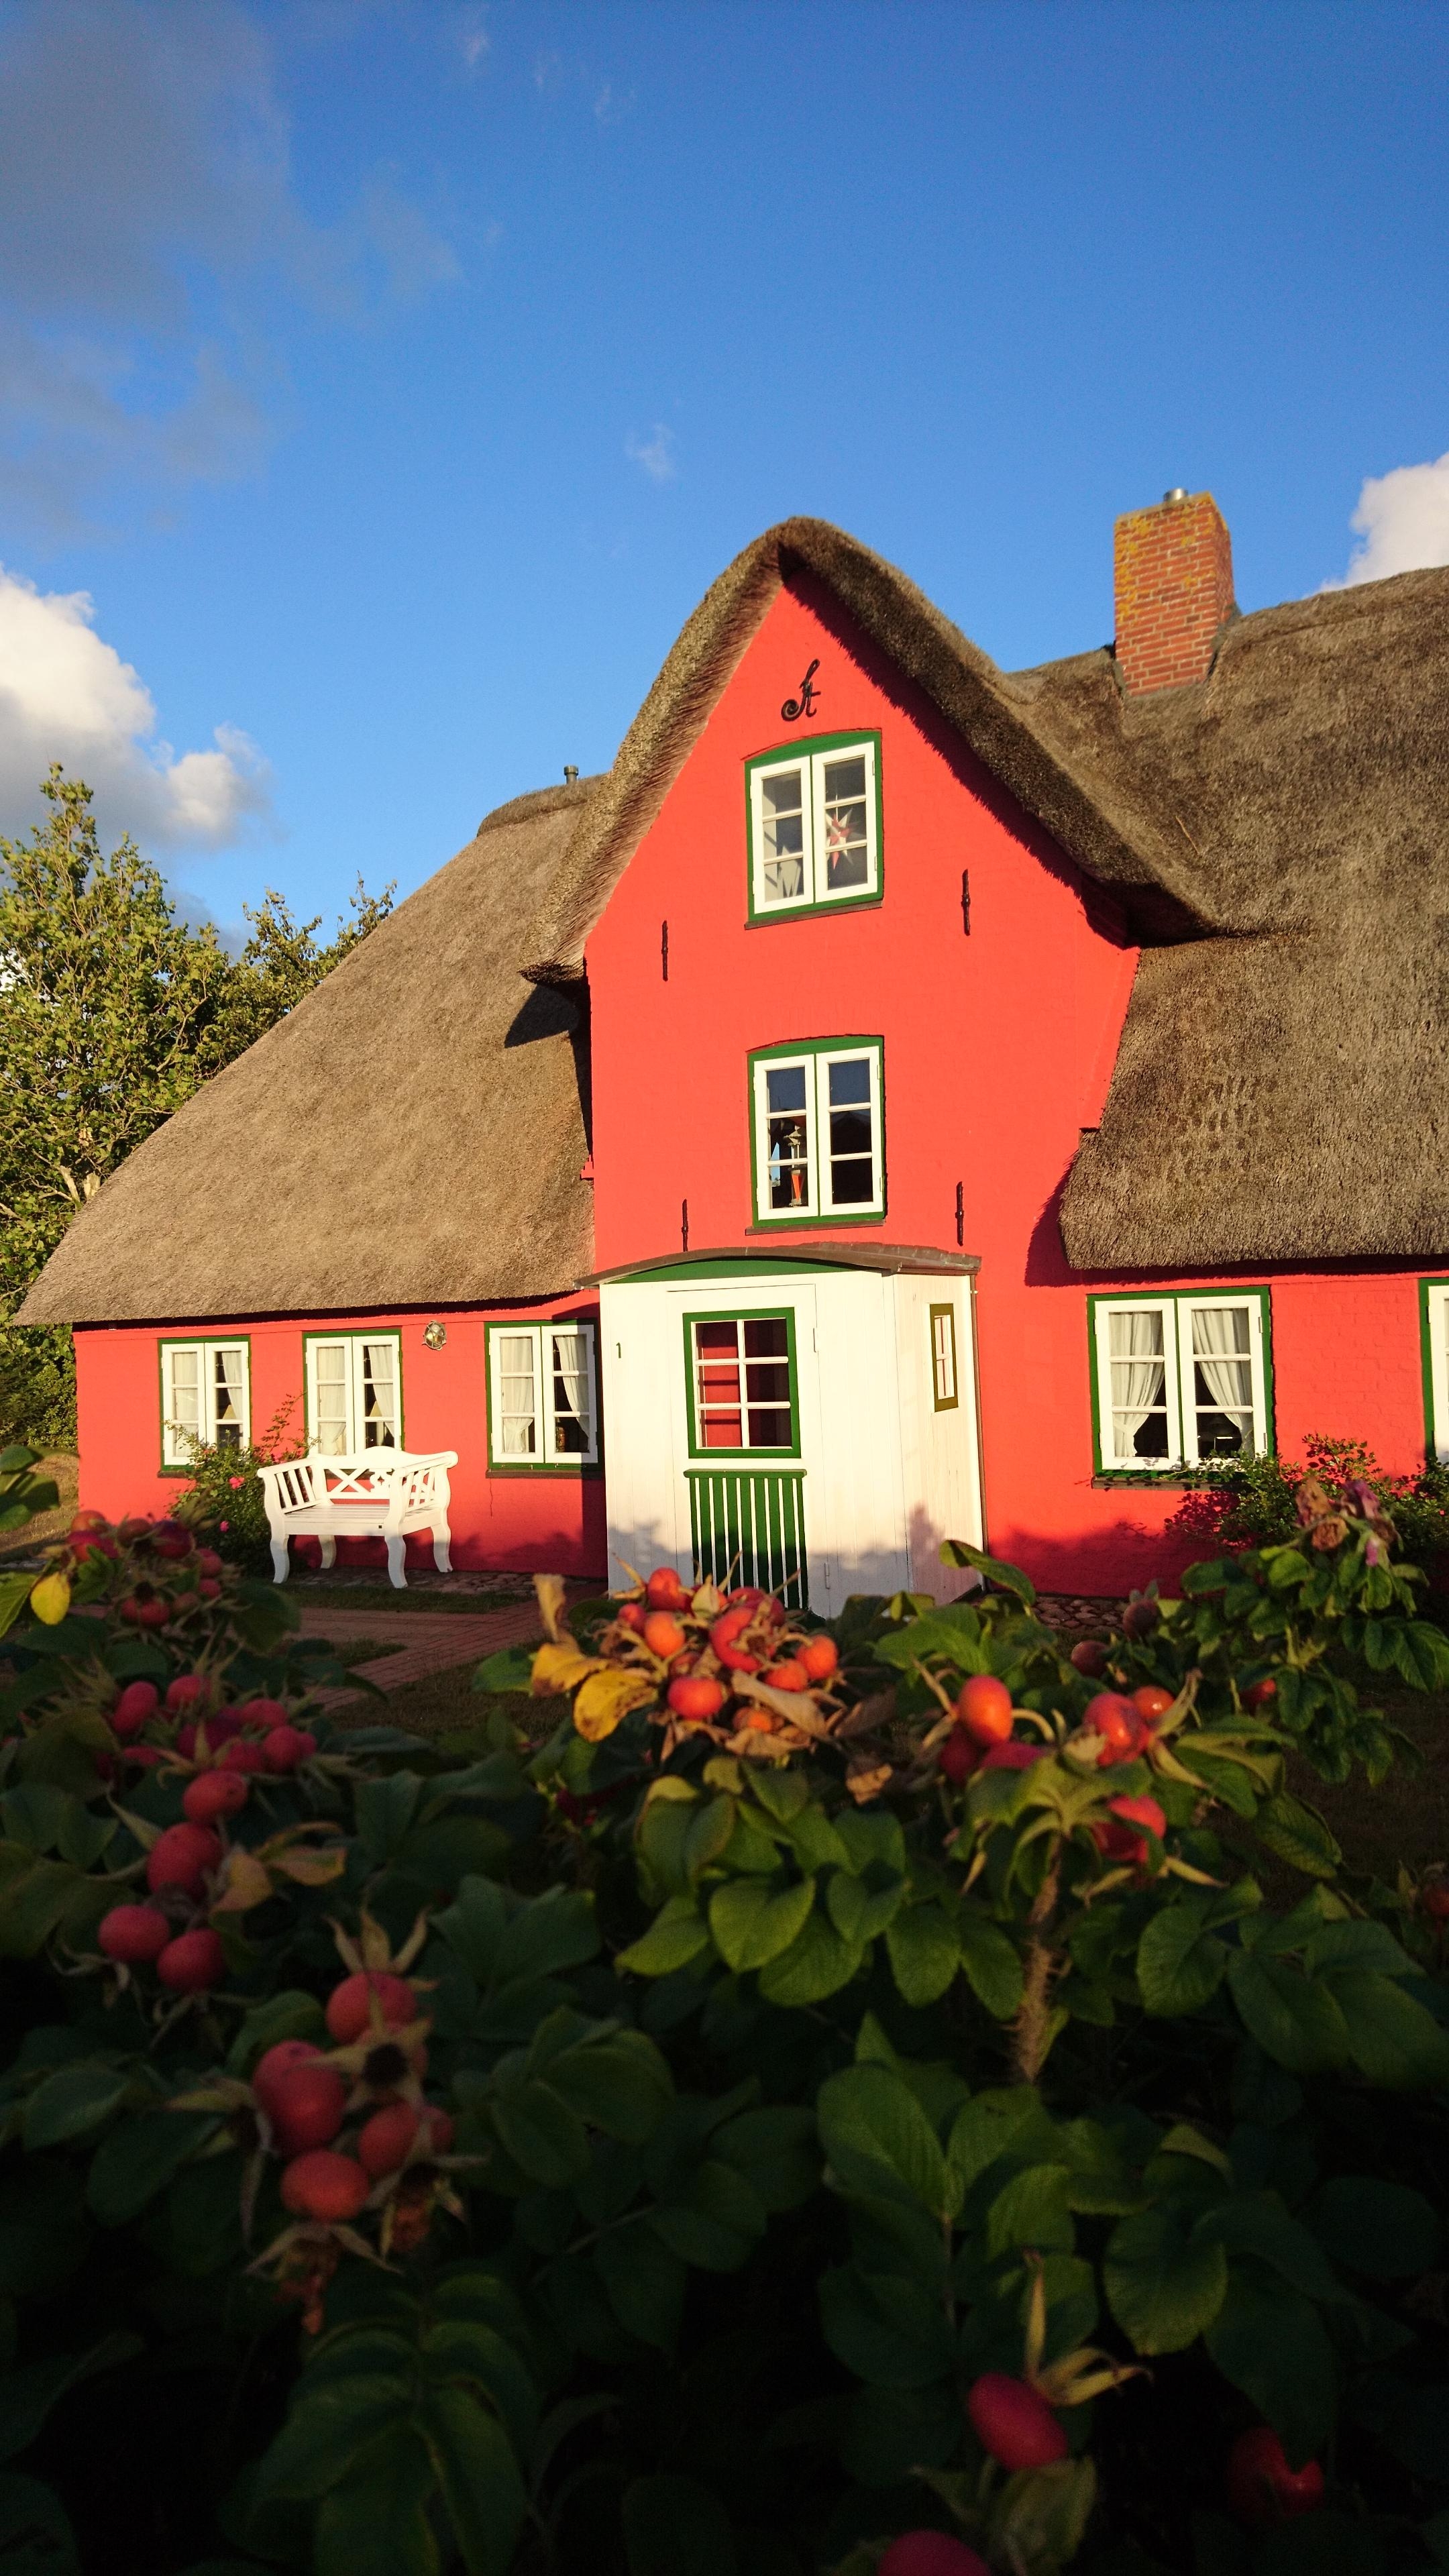 I felt in love with the red house ☀️
#reetdach #urlaub #nordfriesland